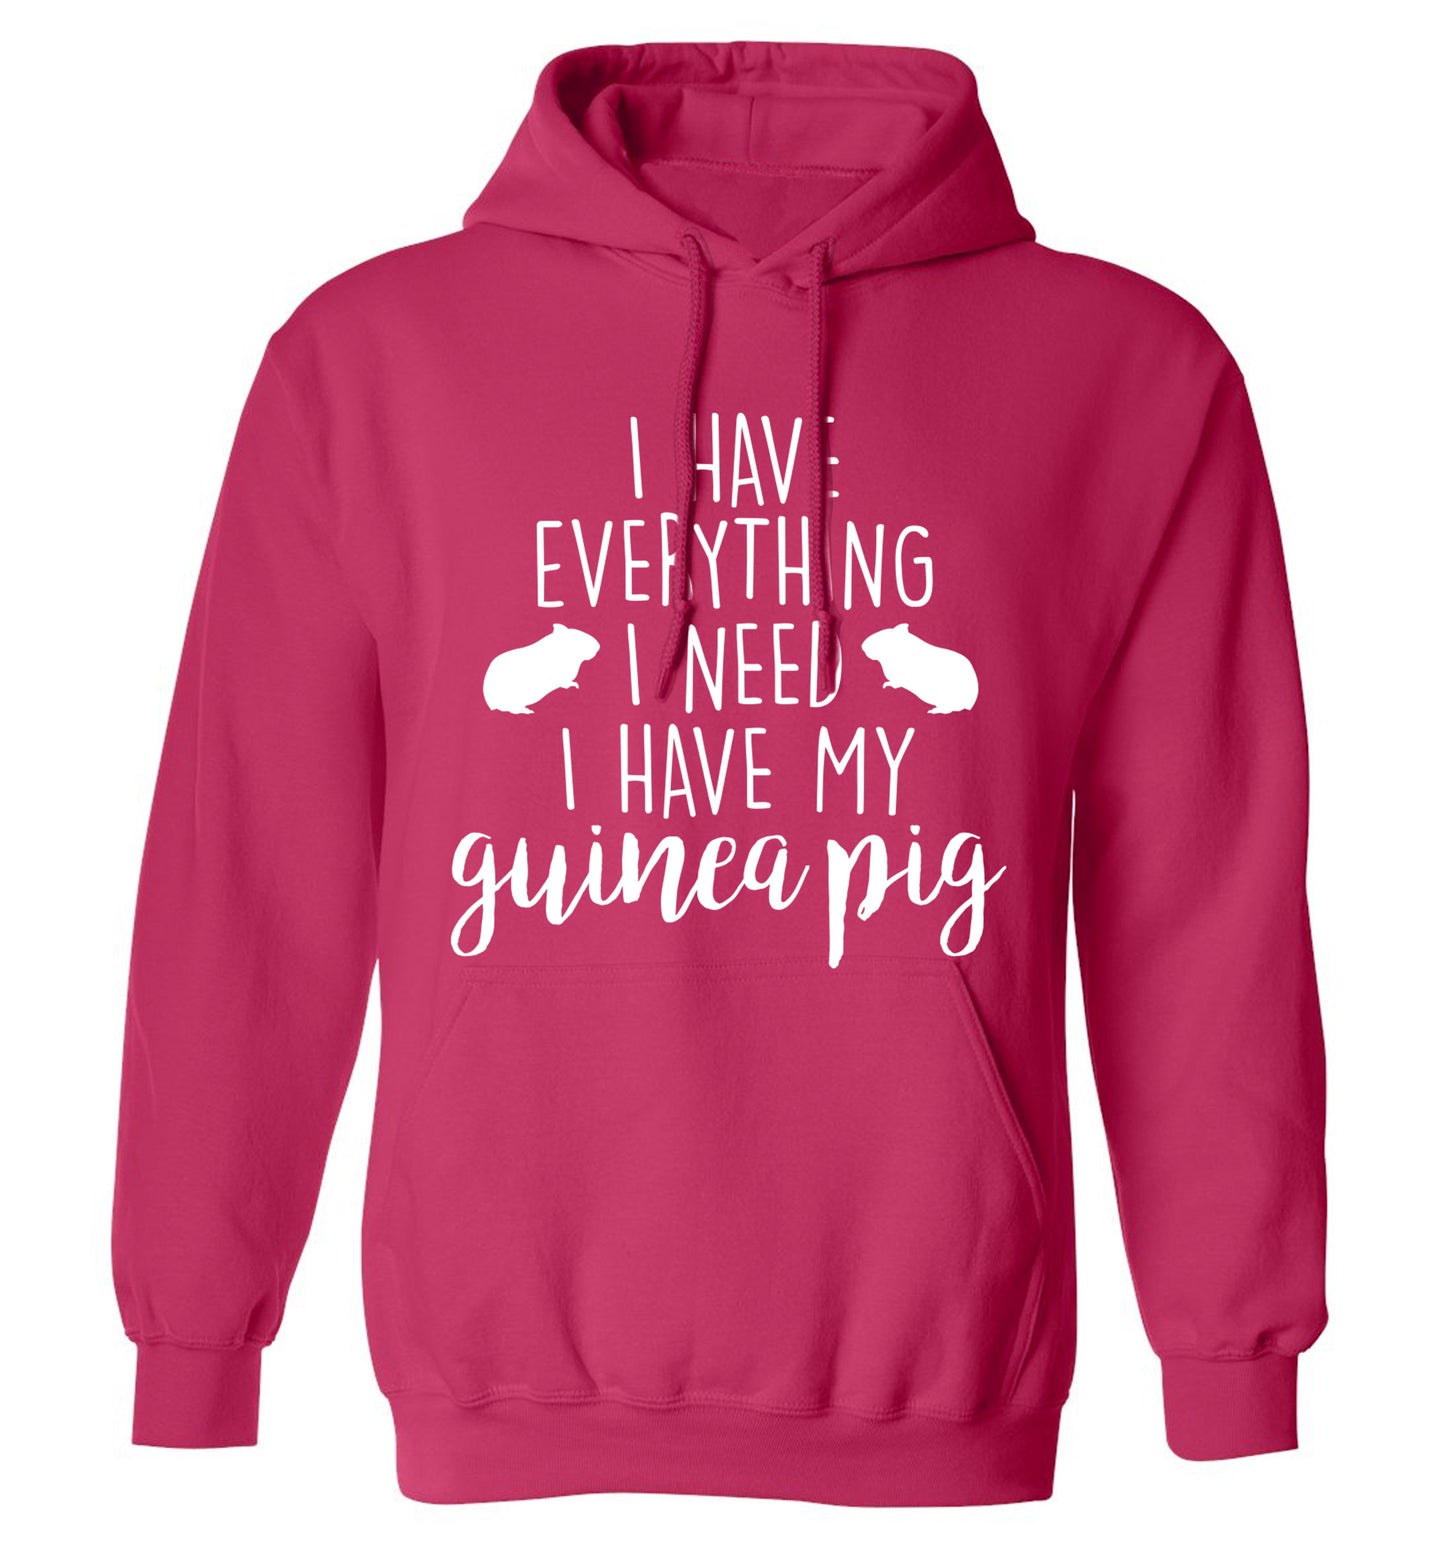 I have everything I need, I have my guinea pig adults unisex pink hoodie 2XL